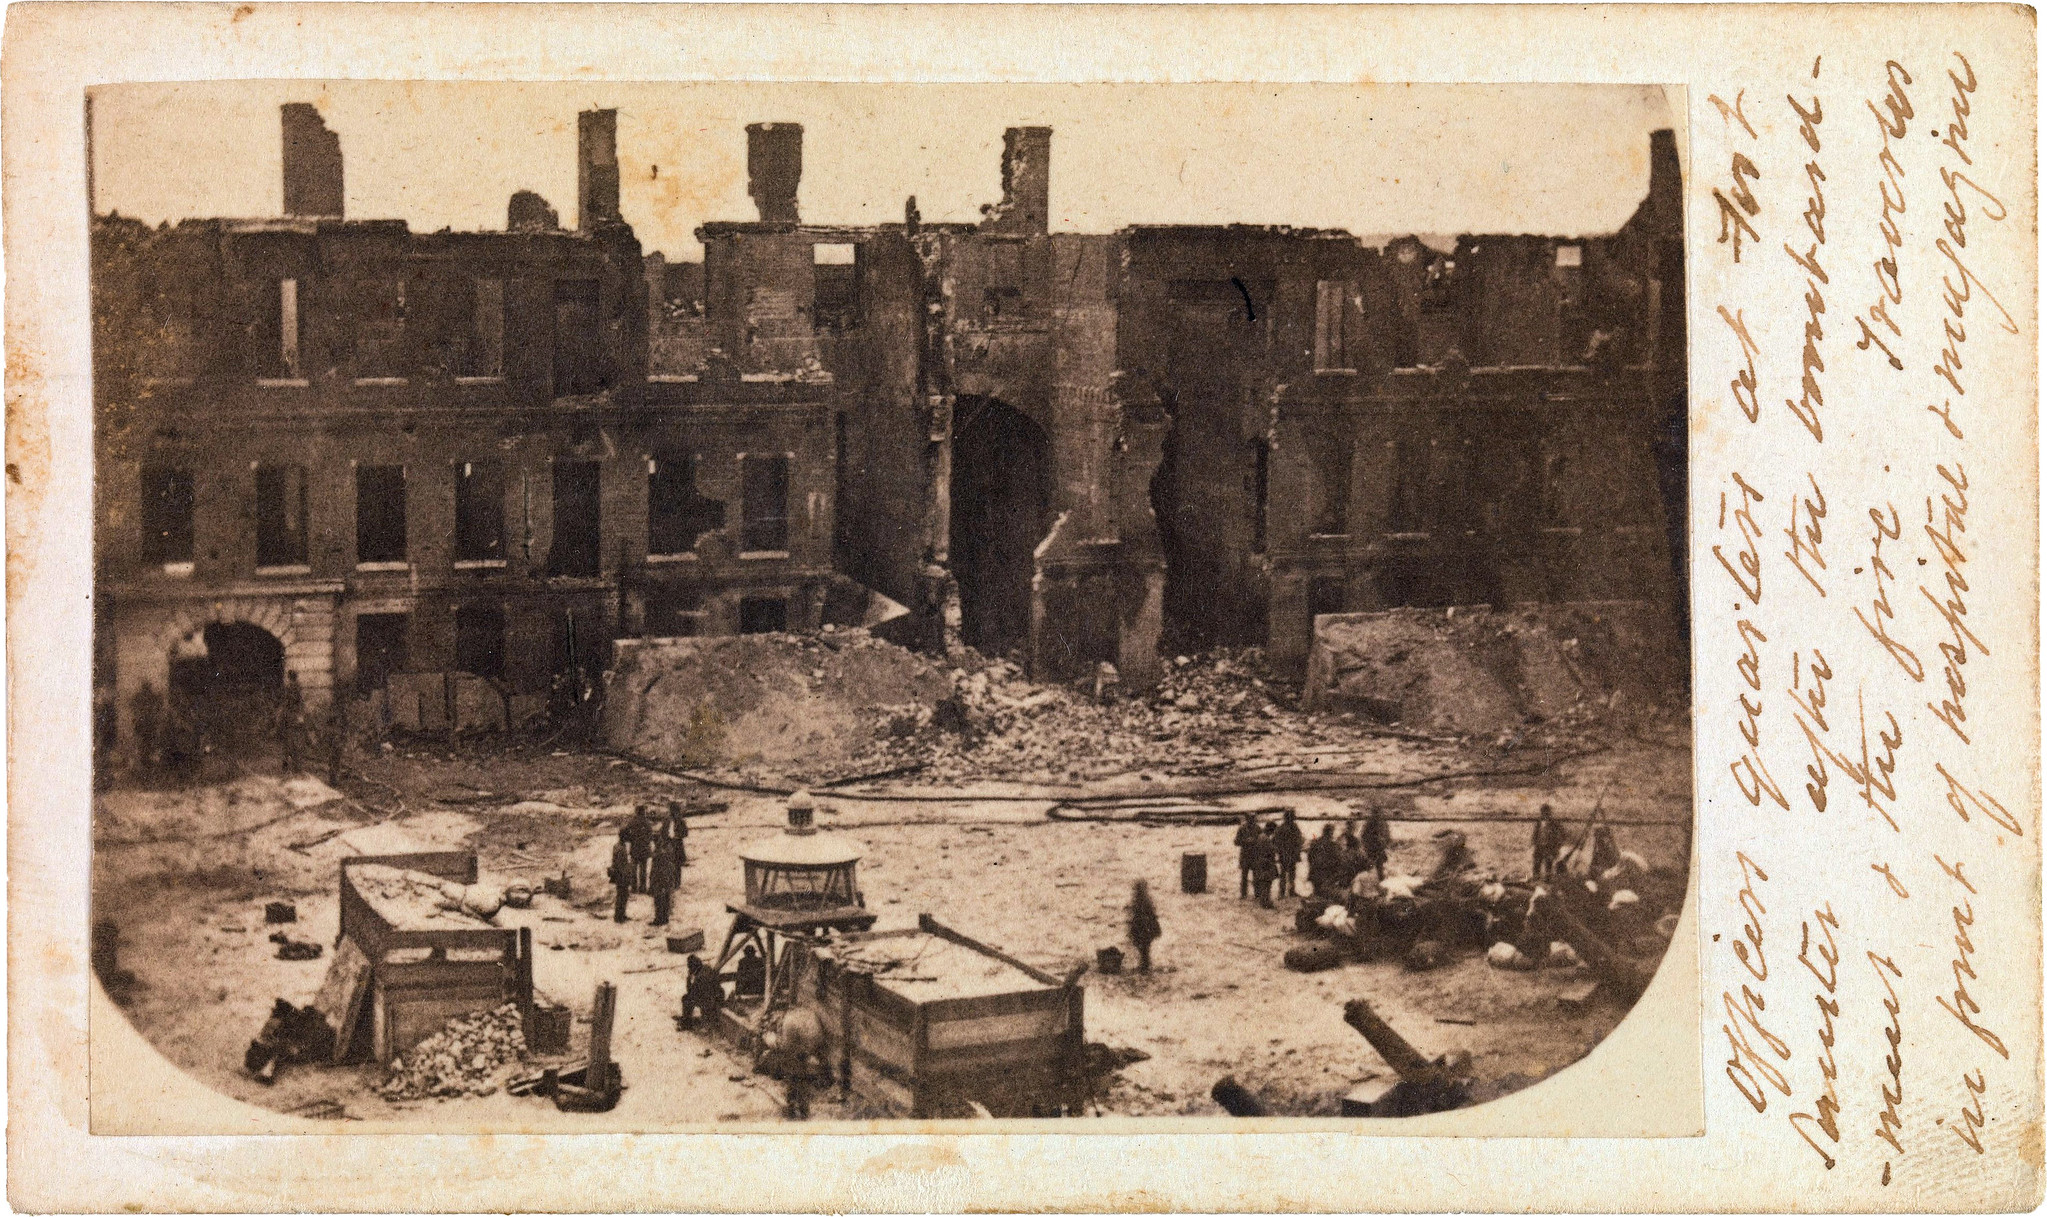 The Evacuation of Fort Sumter, April 1861 -- the interior of the fort after the battle